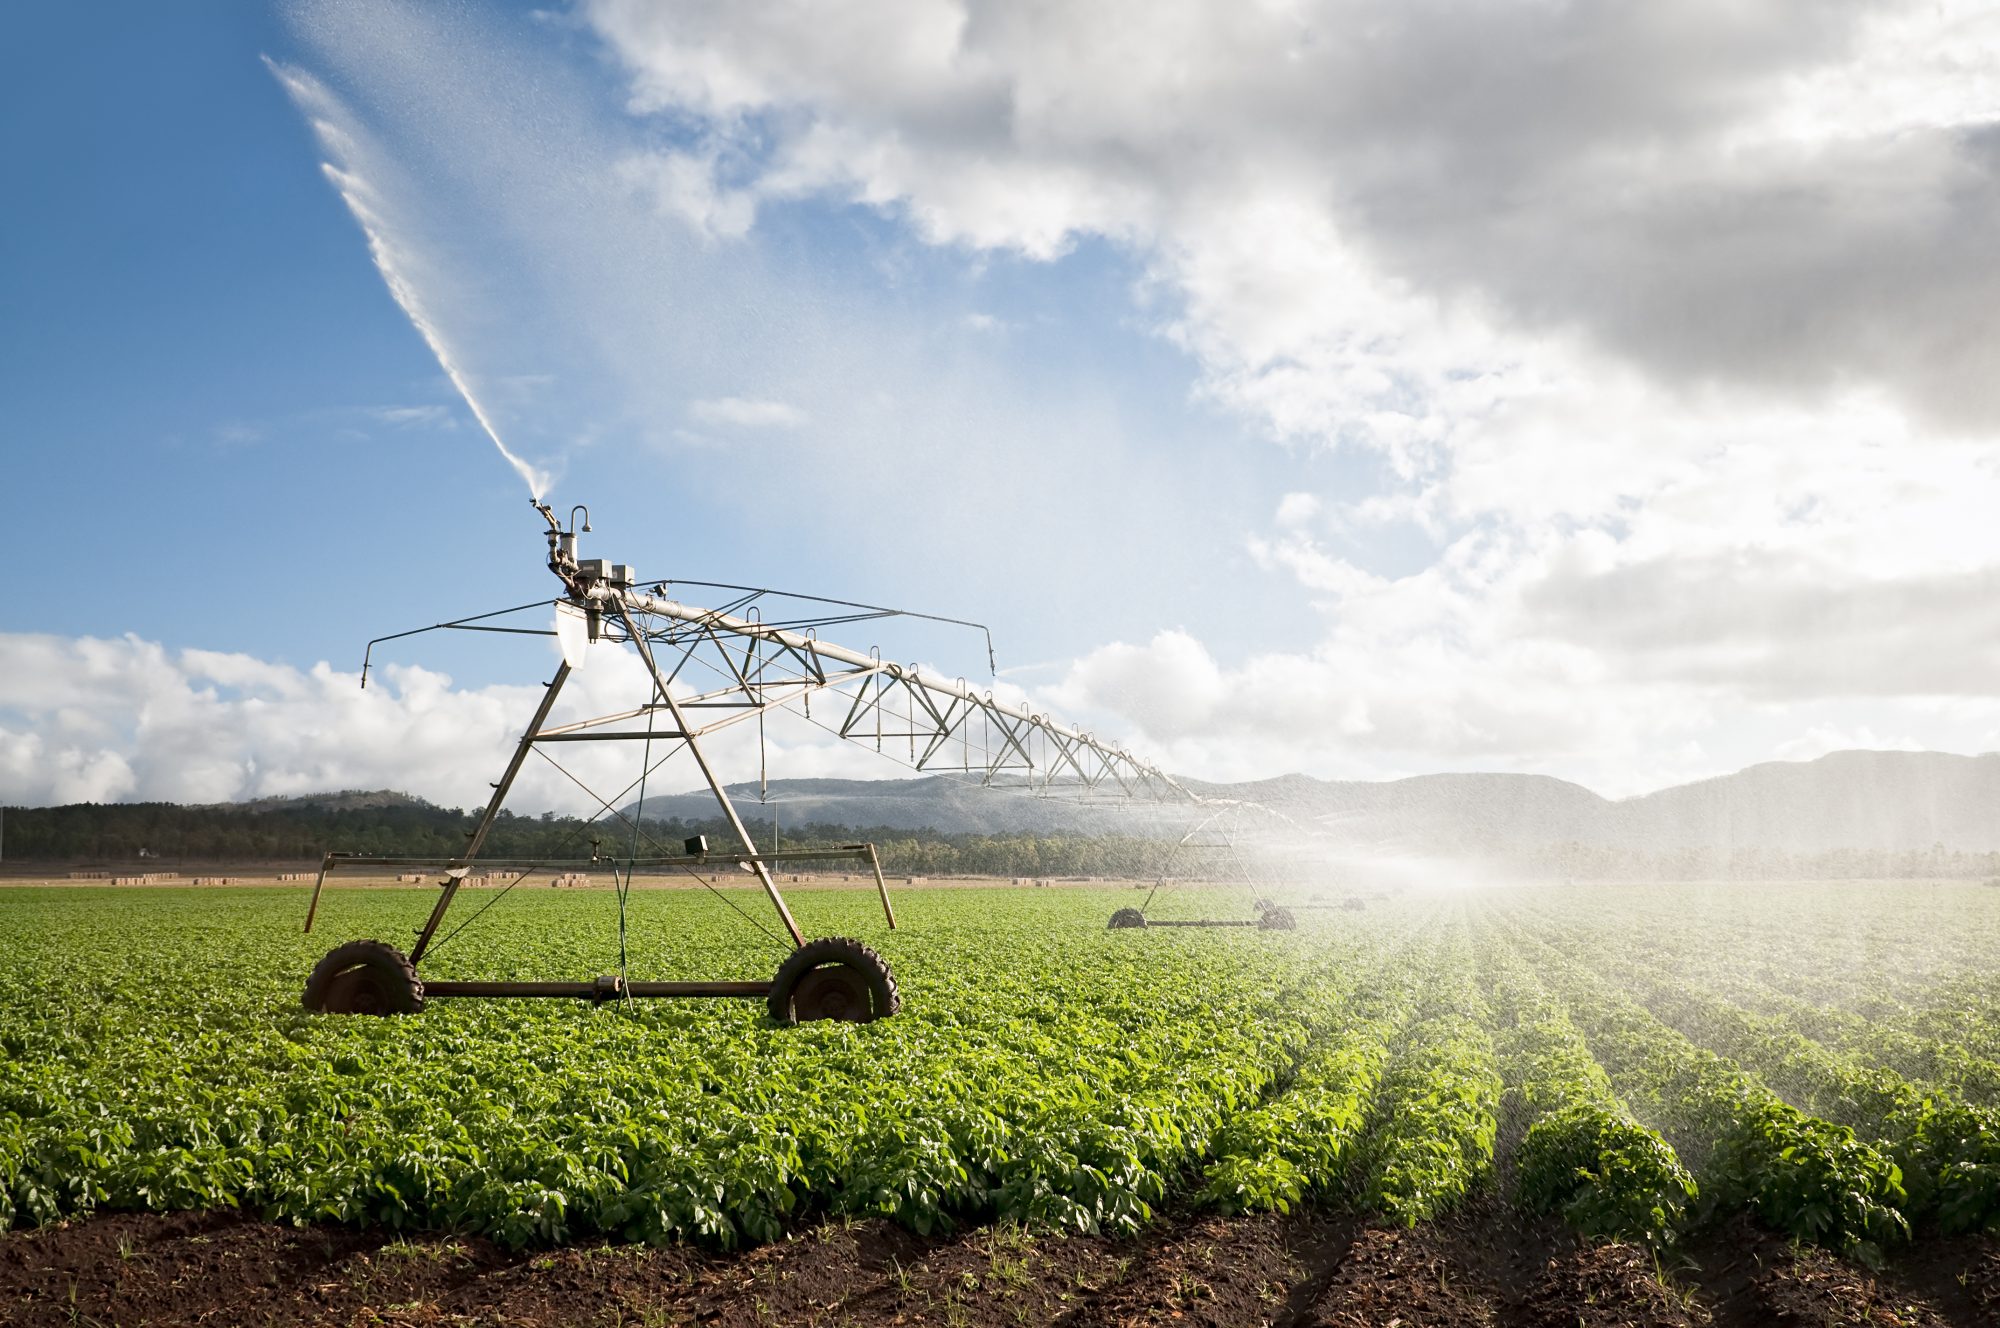 Role of Water Technology in Agriculture